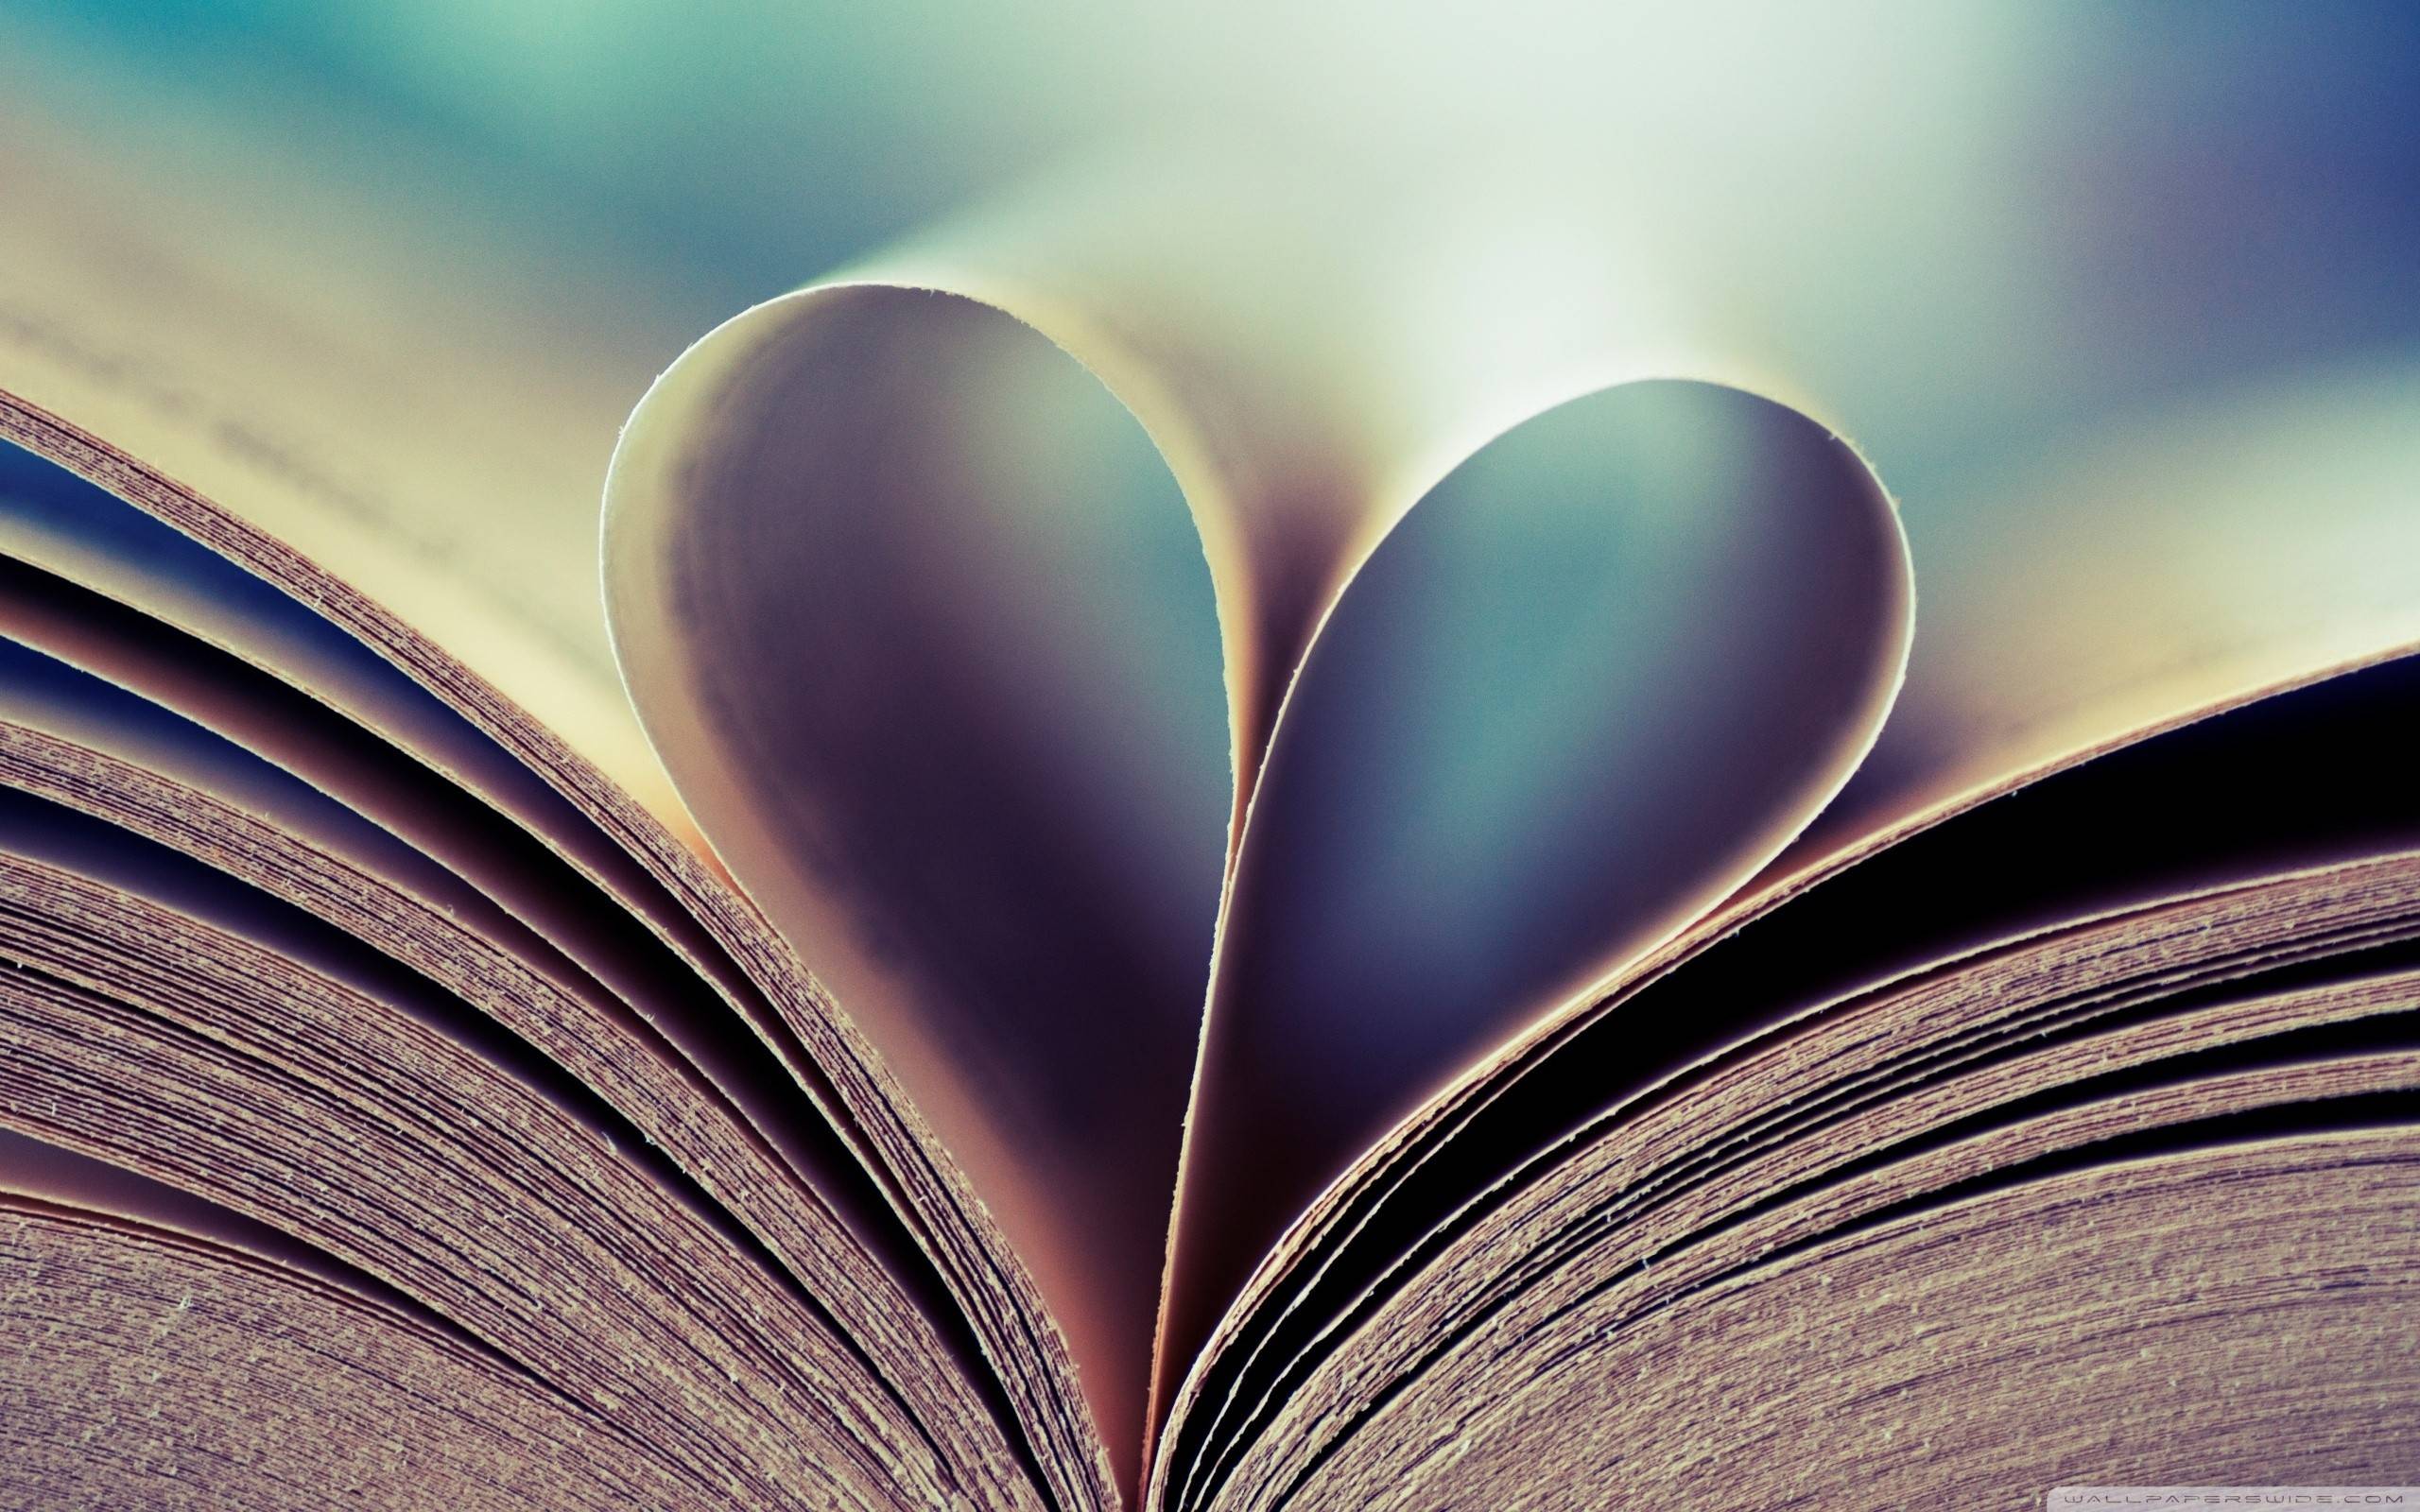 The Image of Abstract Love Paper Books Hearts 2560x1600 HD